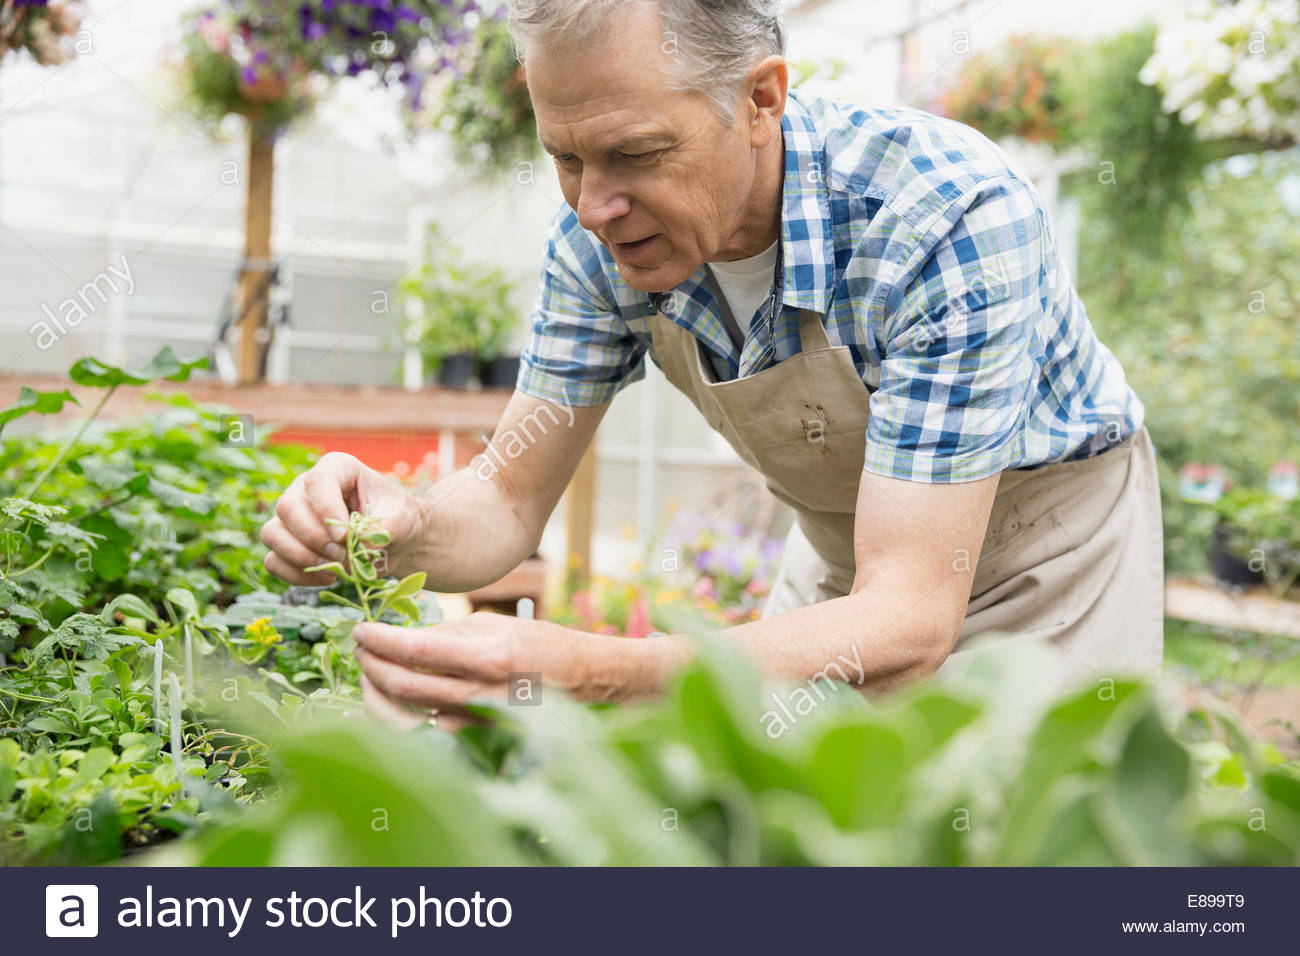 Worker examining plant in plant nursery greenhouse Stock Photo